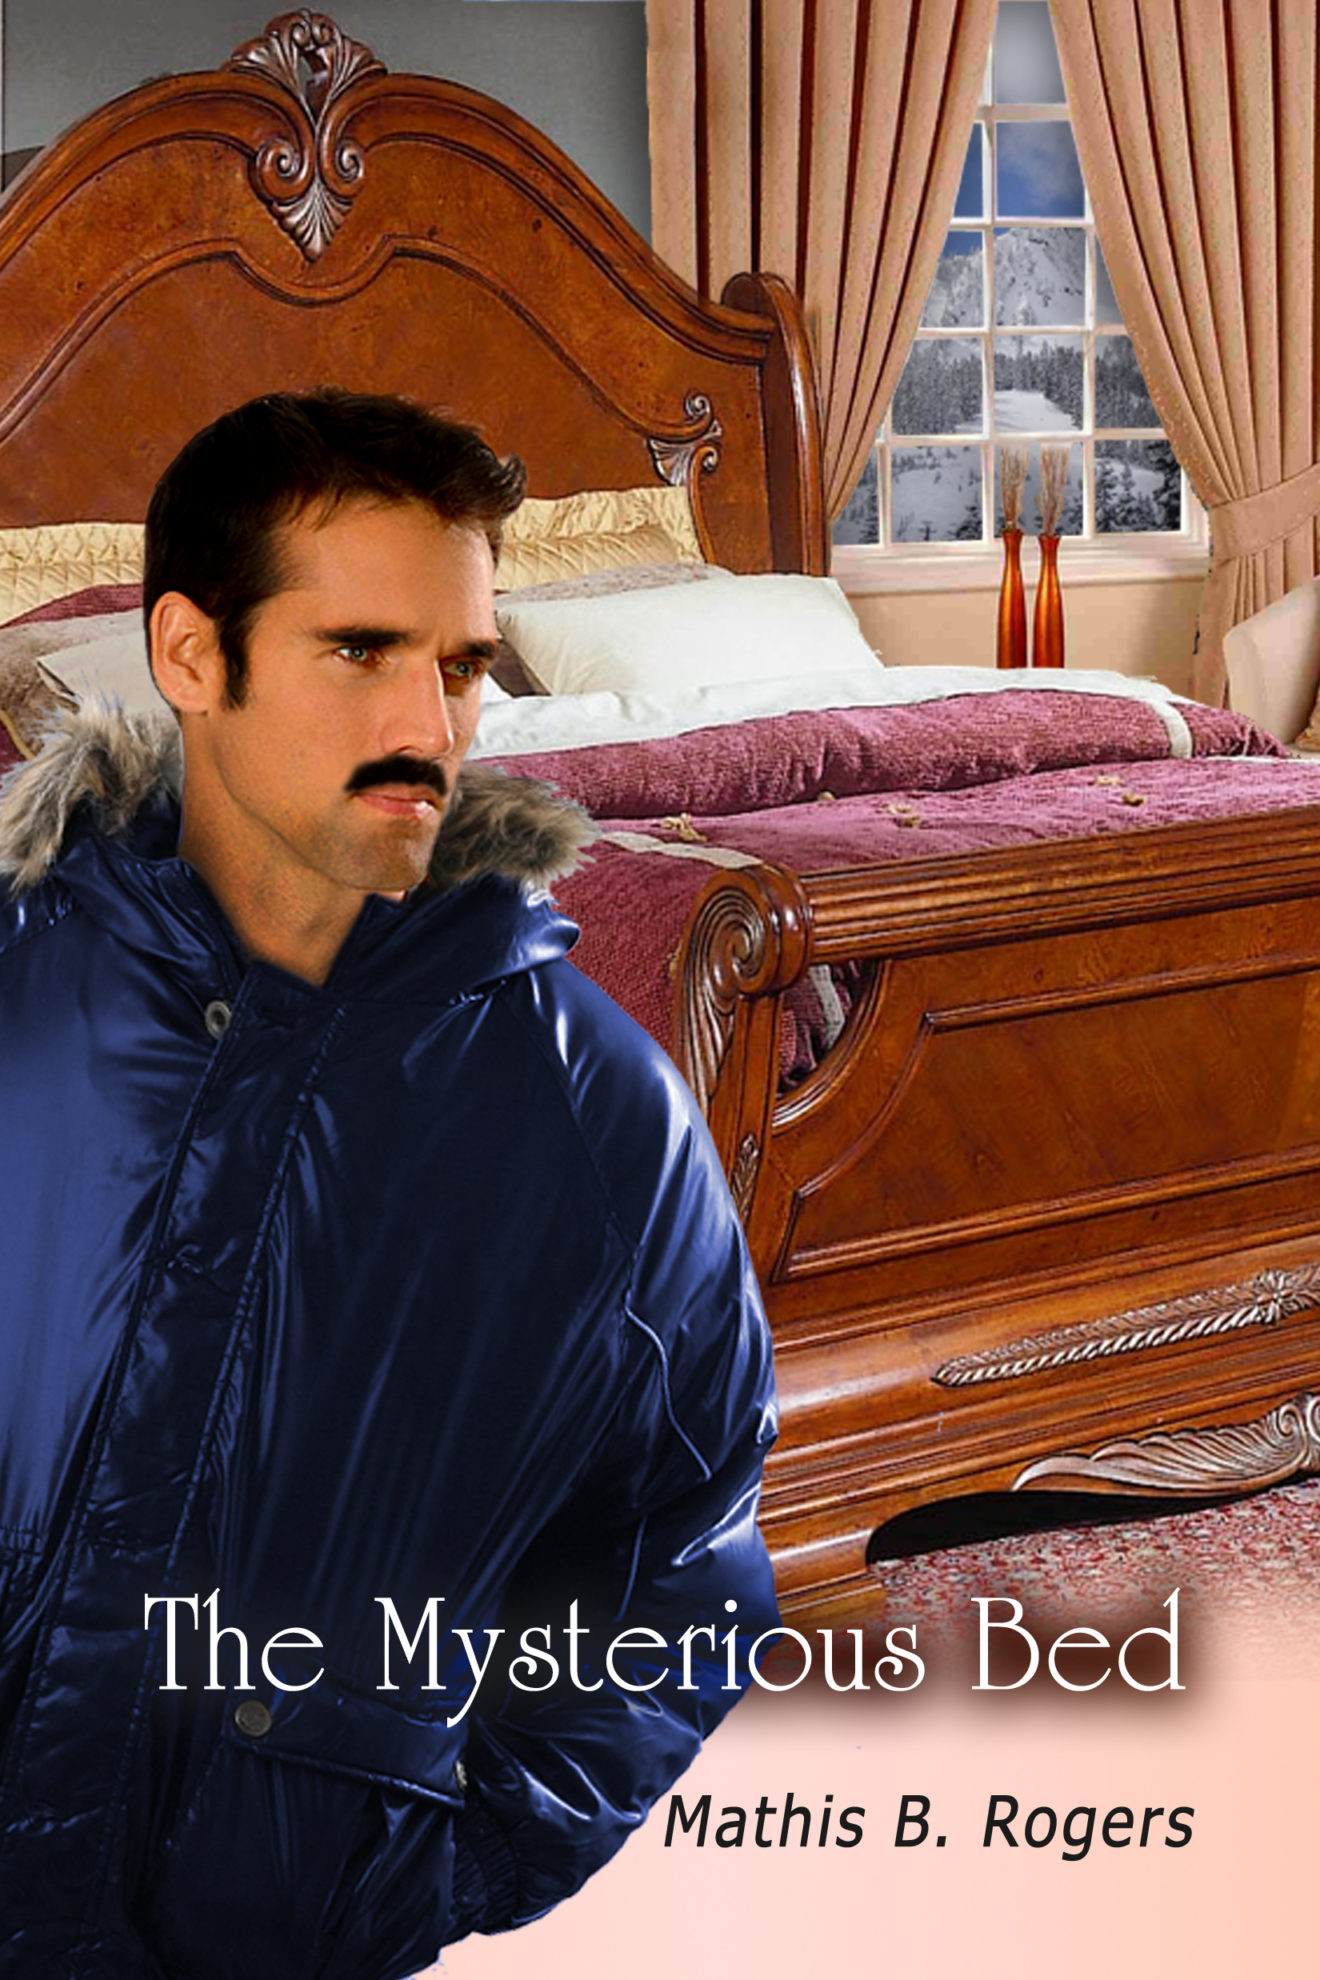 The Mysterious Bed